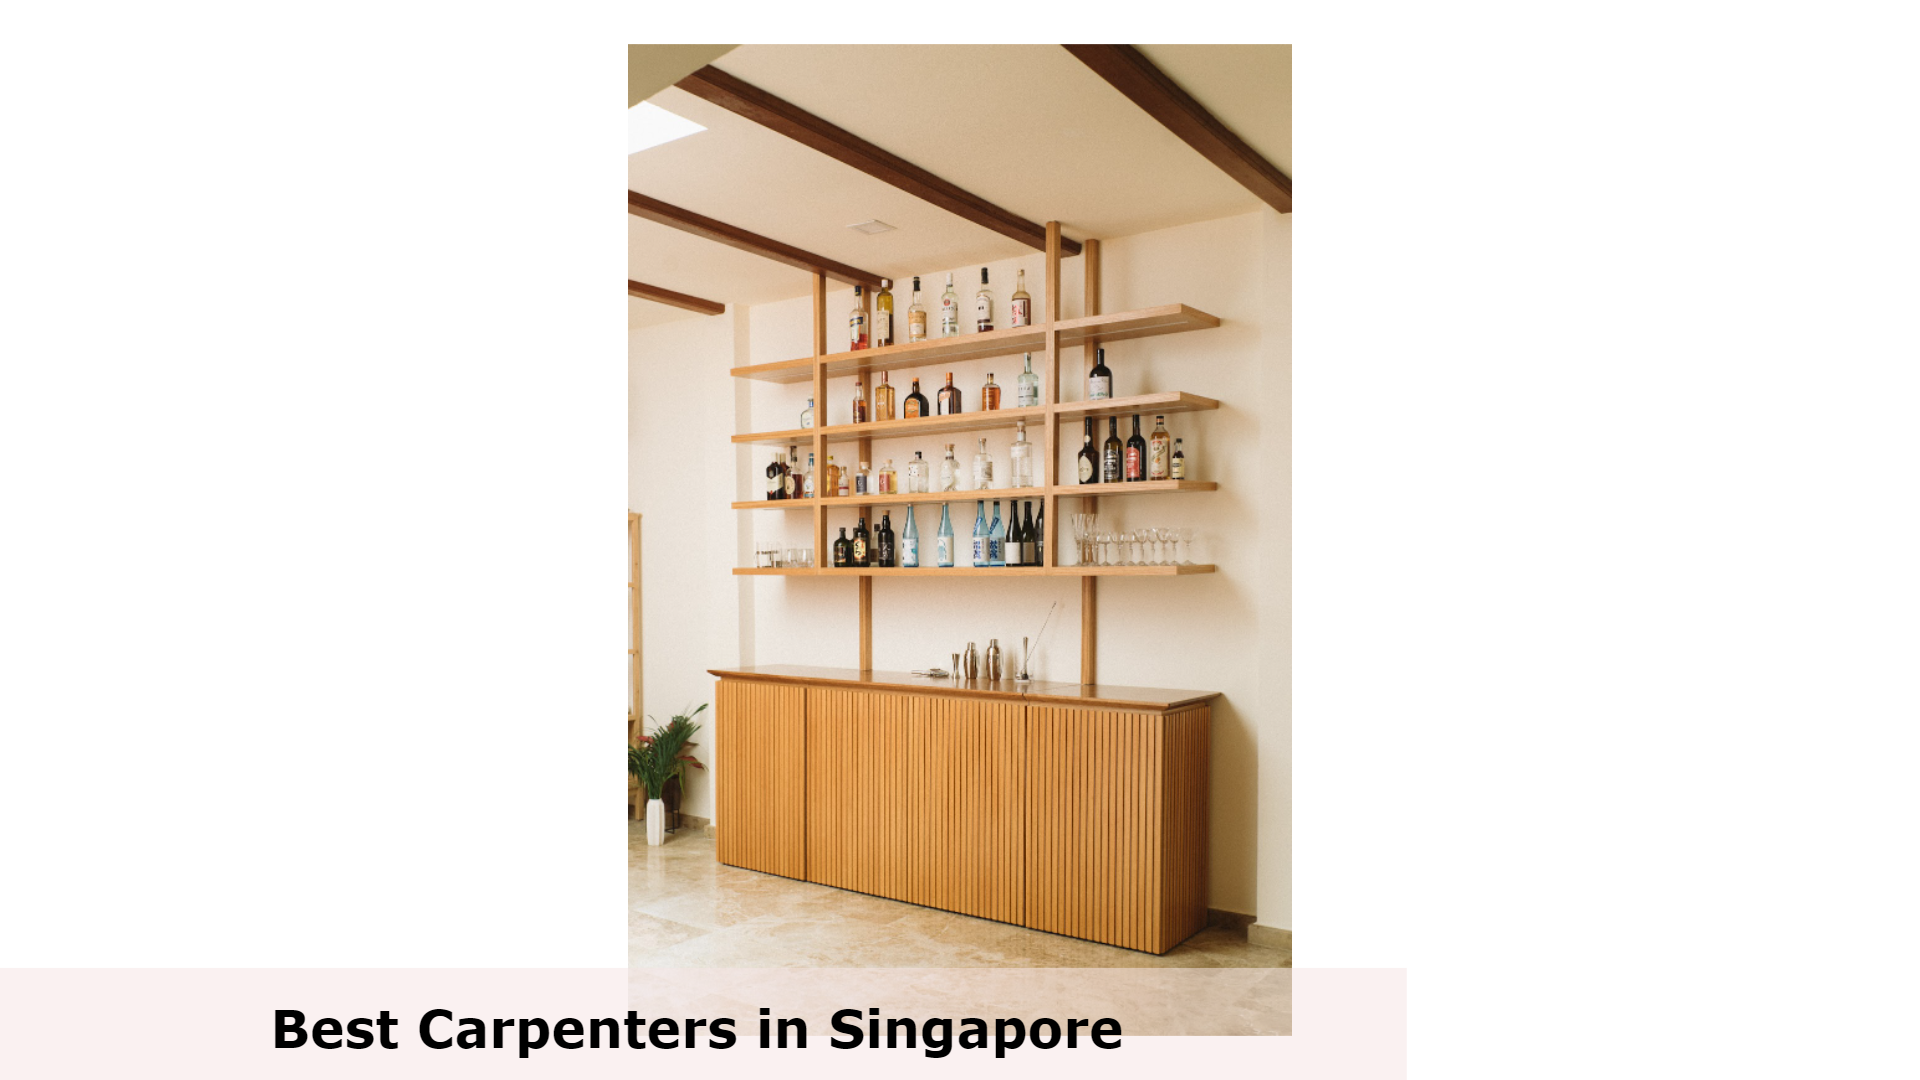 Rogers & Son - Best Carpenters in Singapore, Carpenters in Singapore, small carpentry work singapore, carpentry price list Singapore, How much does carpentry work cost Singapore?, built-in wardrobe singapore price, cheap carpenters in singapore, reliable carpenters in singapore, small carpentry work singapore, best carpenter in singapore, malaysia carpenter in singapore, freelance carpenter singapore, direct carpentry services singapore, singapore carpentry review, carpentry workshop singapore, Where can I do carpentry work in Singapore?, Best carpenter in Singapore
